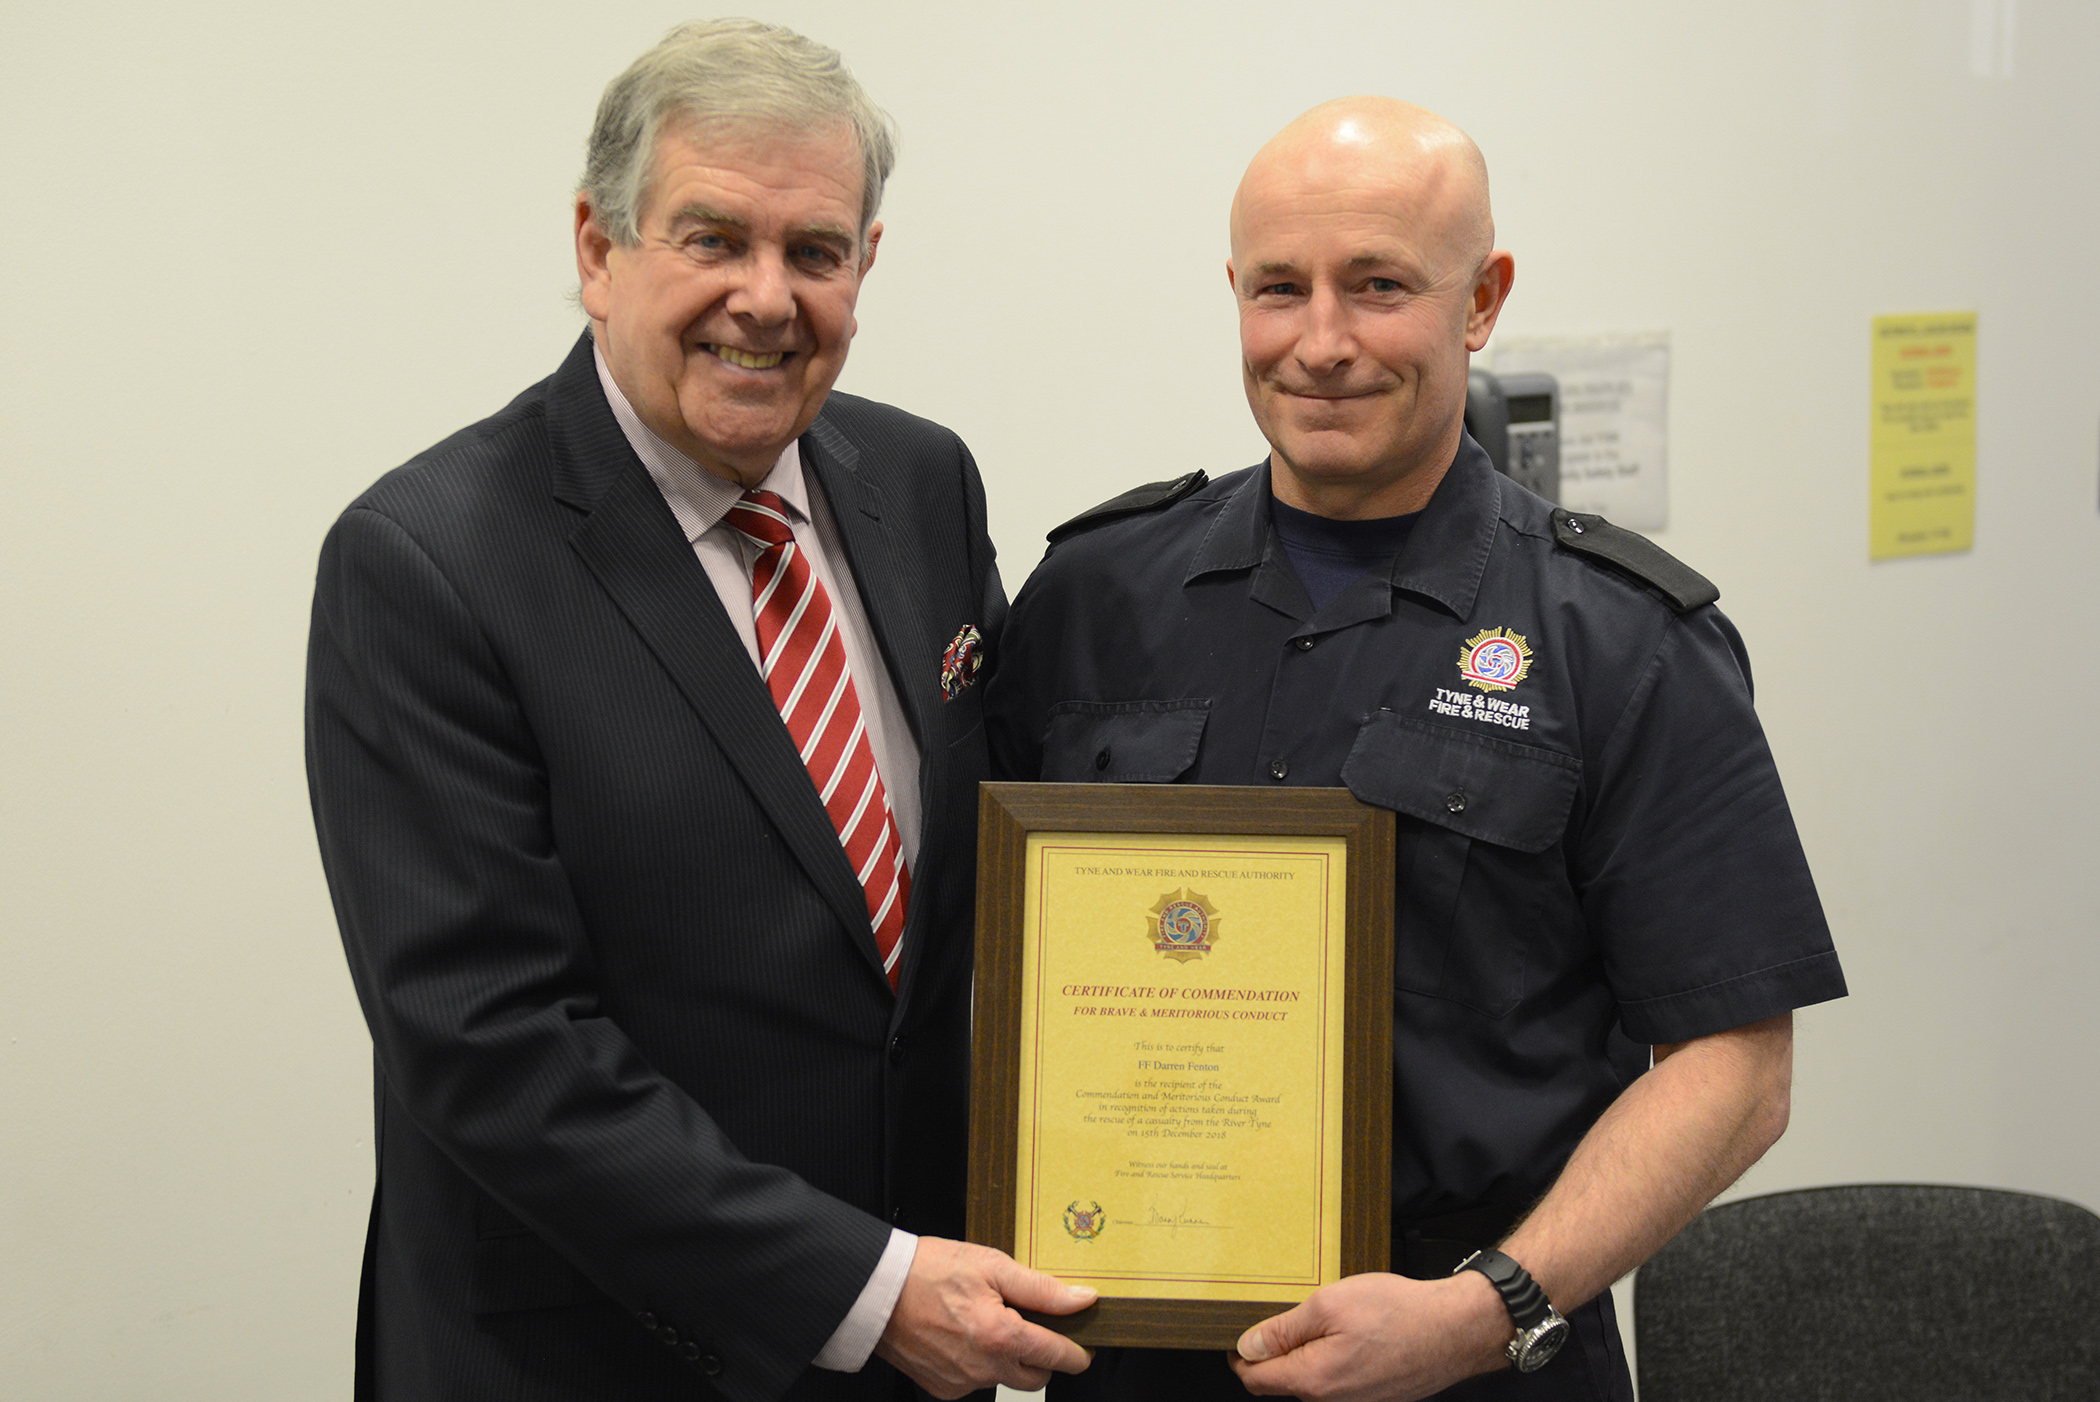 TWFRA Chair Barry Curran presenting FF Darren Fenton with his CFO Commendation
